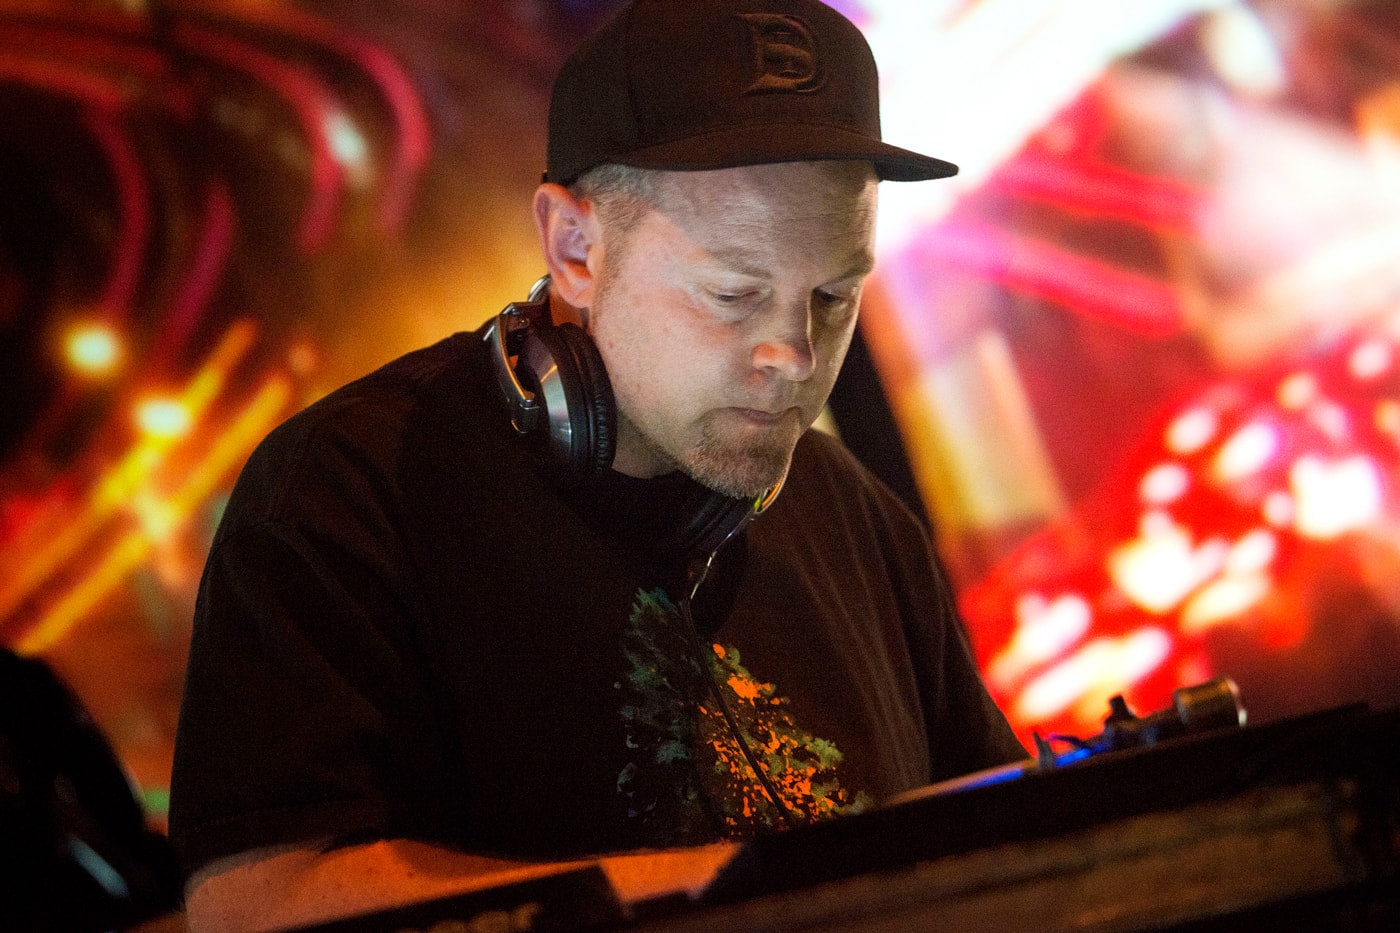 dj-shadow-the-mountain-will-fall-new-video